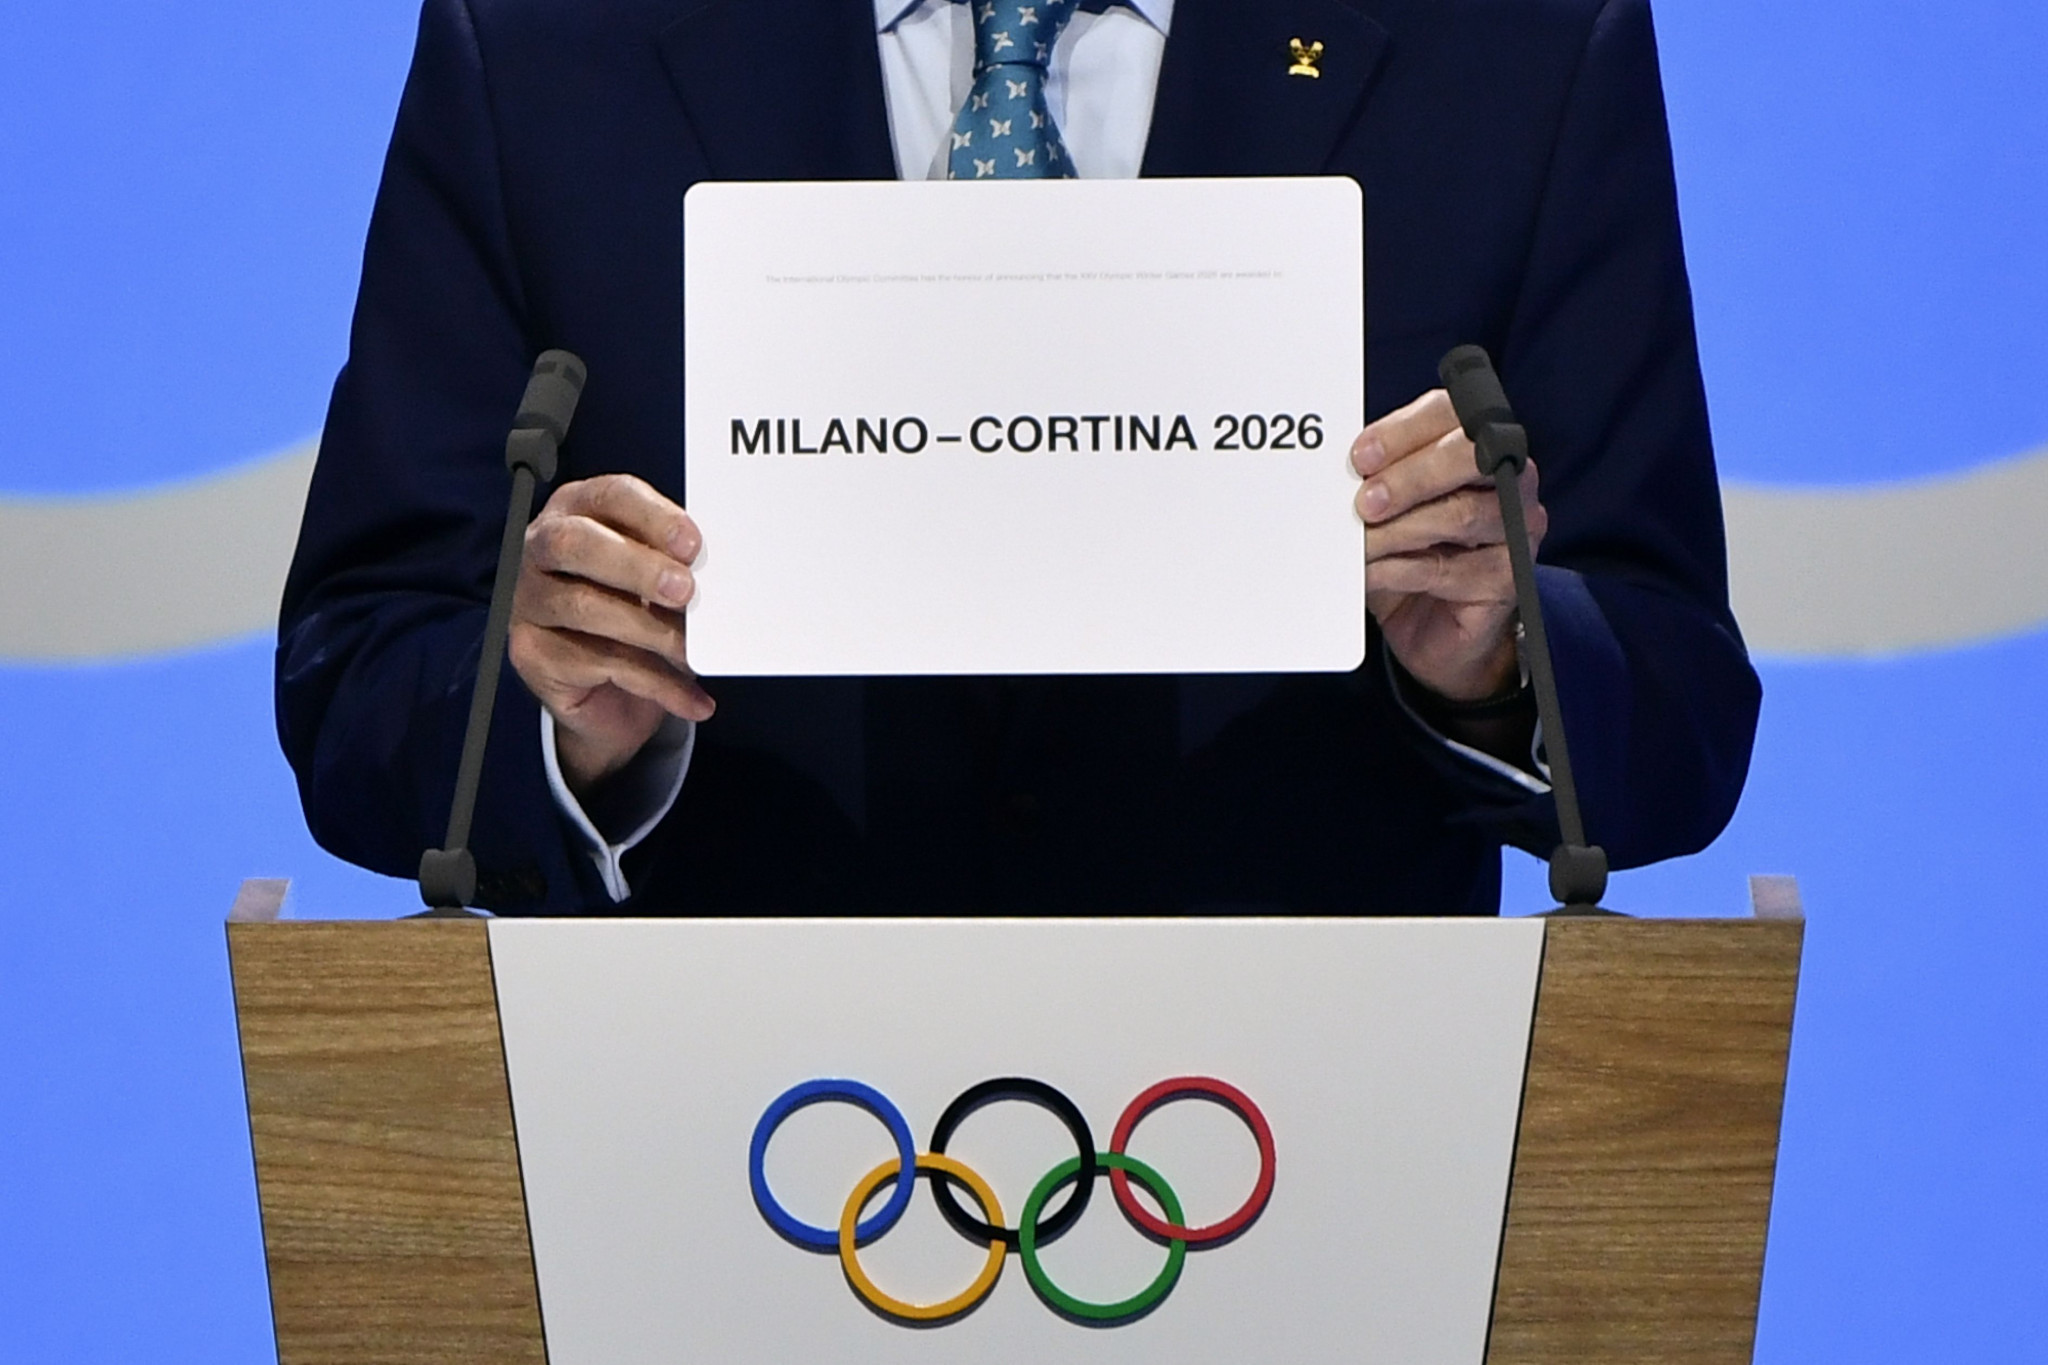 Theo Mallett is aiming to compete at the Milan Cortina 2026 Winter Olympics ©Getty Images